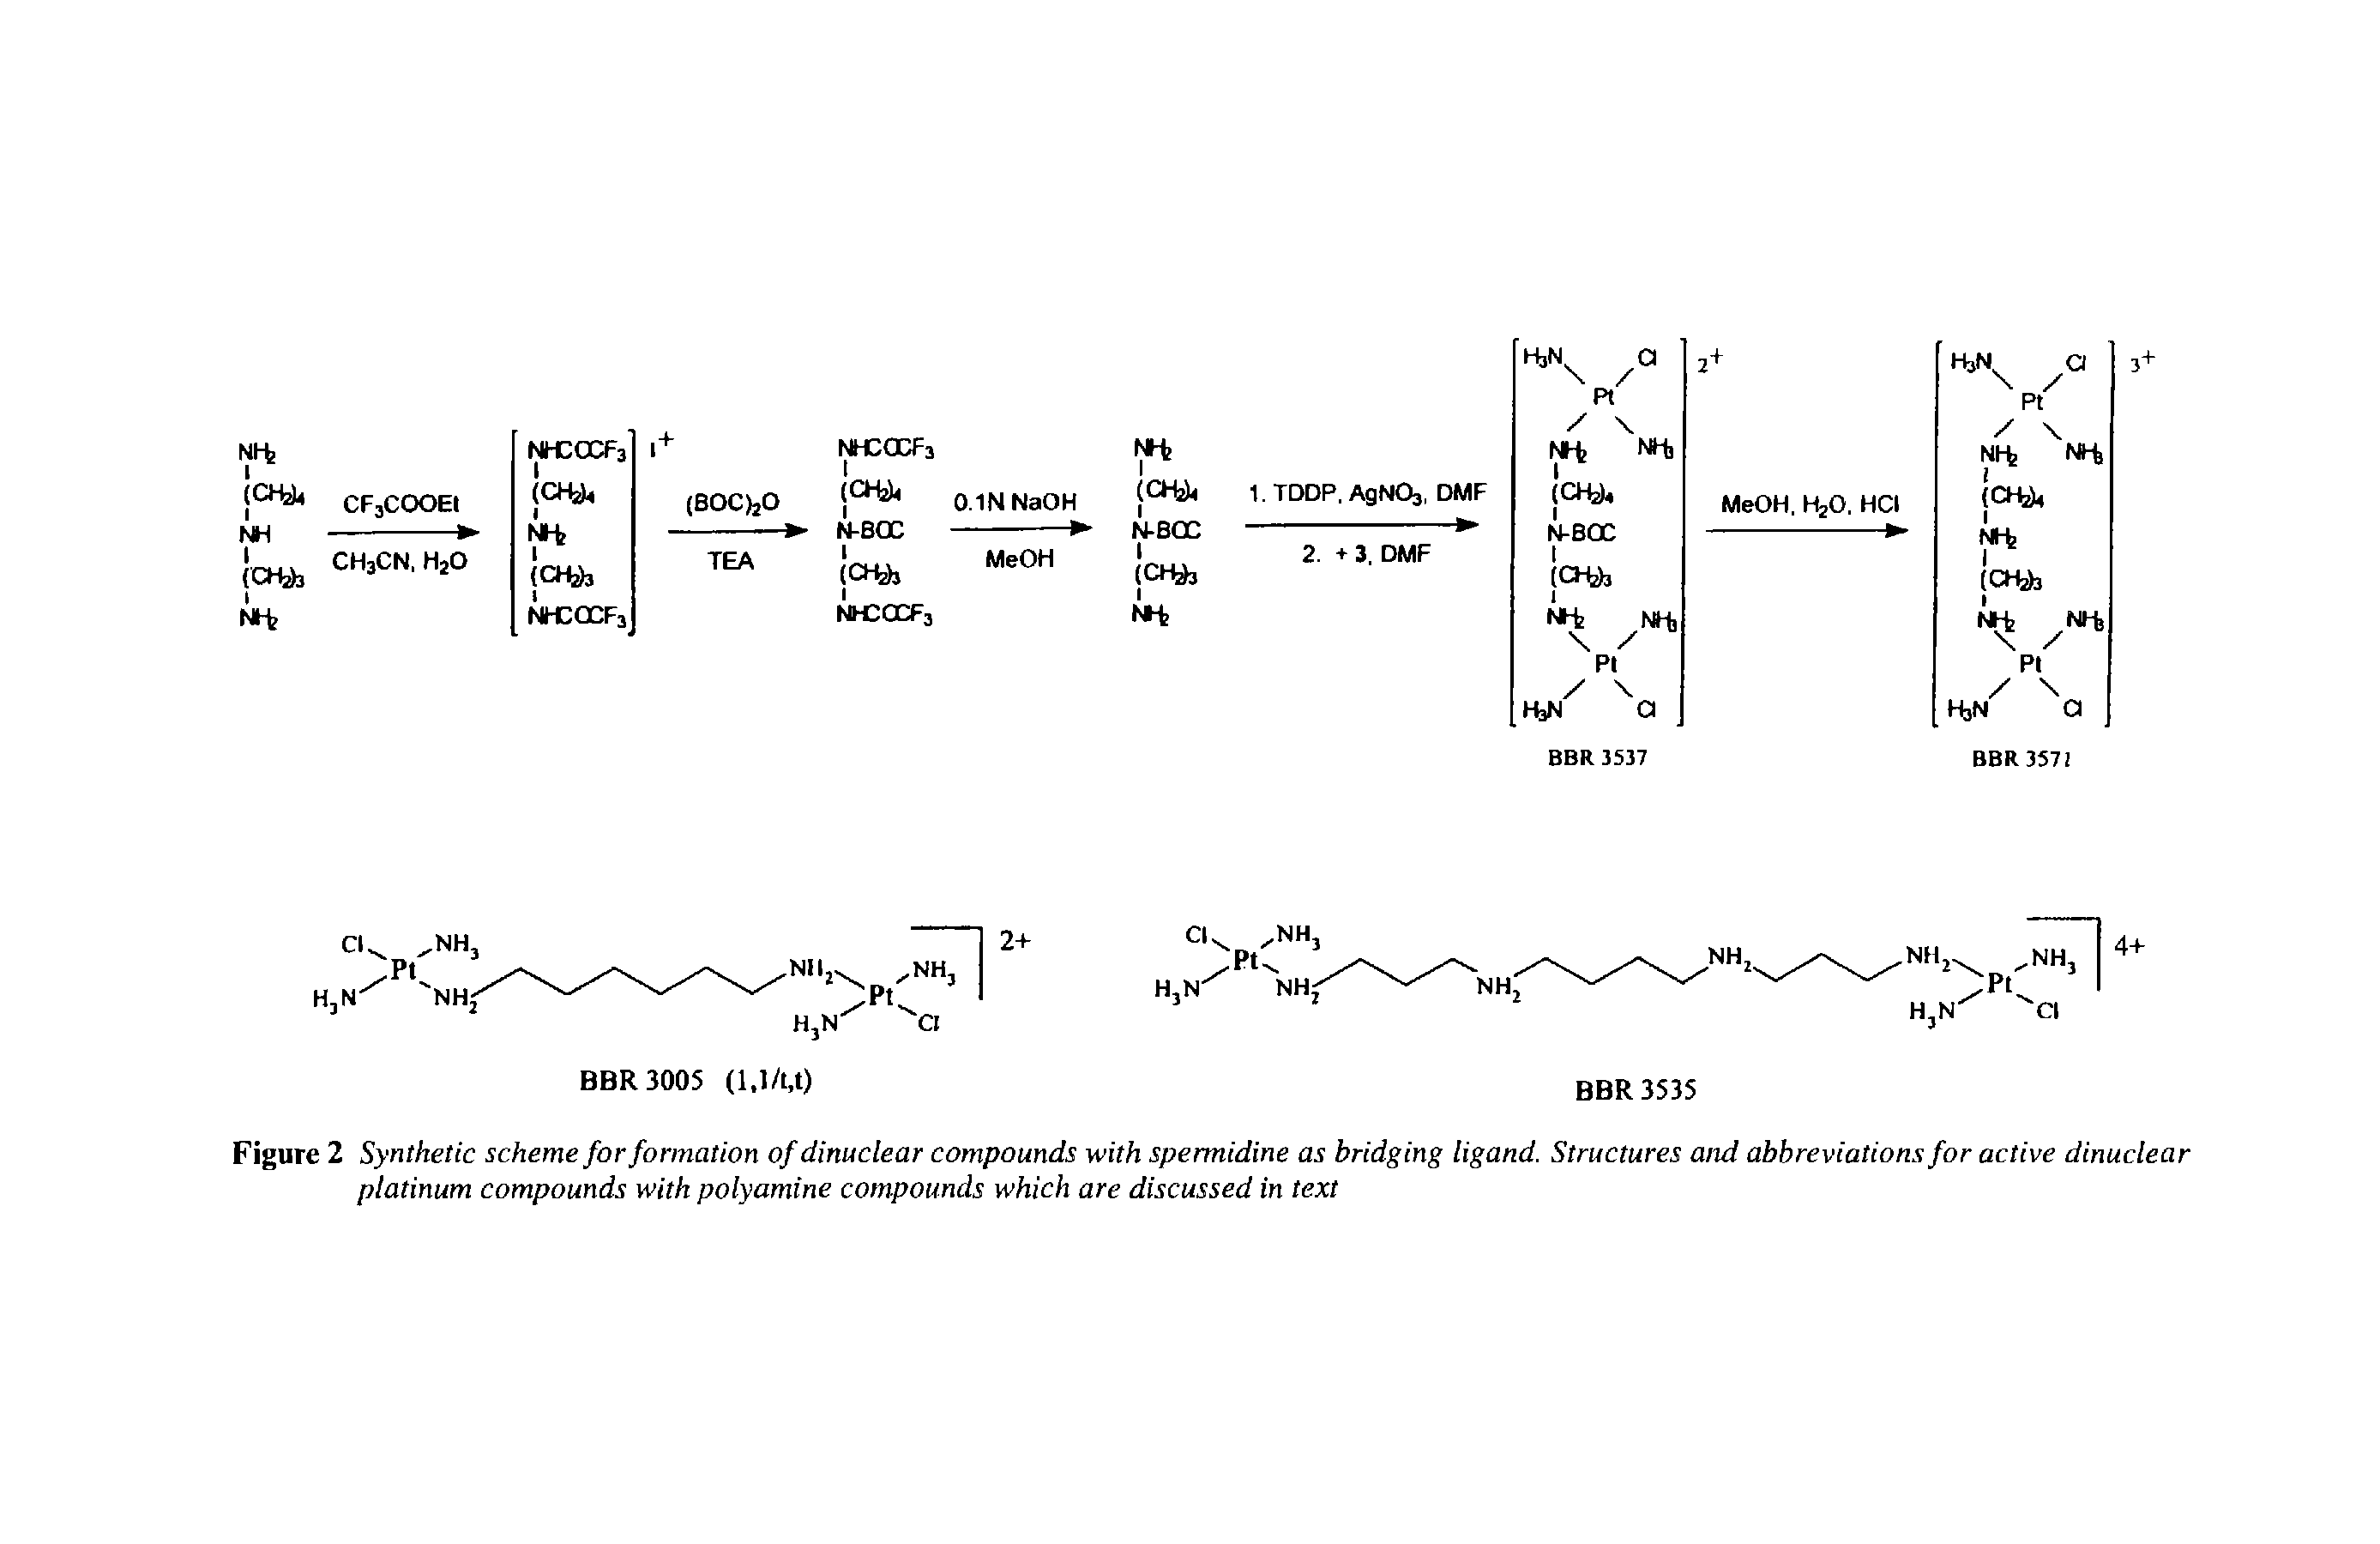 Figure 2 Synthetic scheme for formation of dinuclear compounds with spermidine as bridging ligand. Structures and abbreviations for active dinuclear platinum compounds with polyamine compounds which are discussed in text...